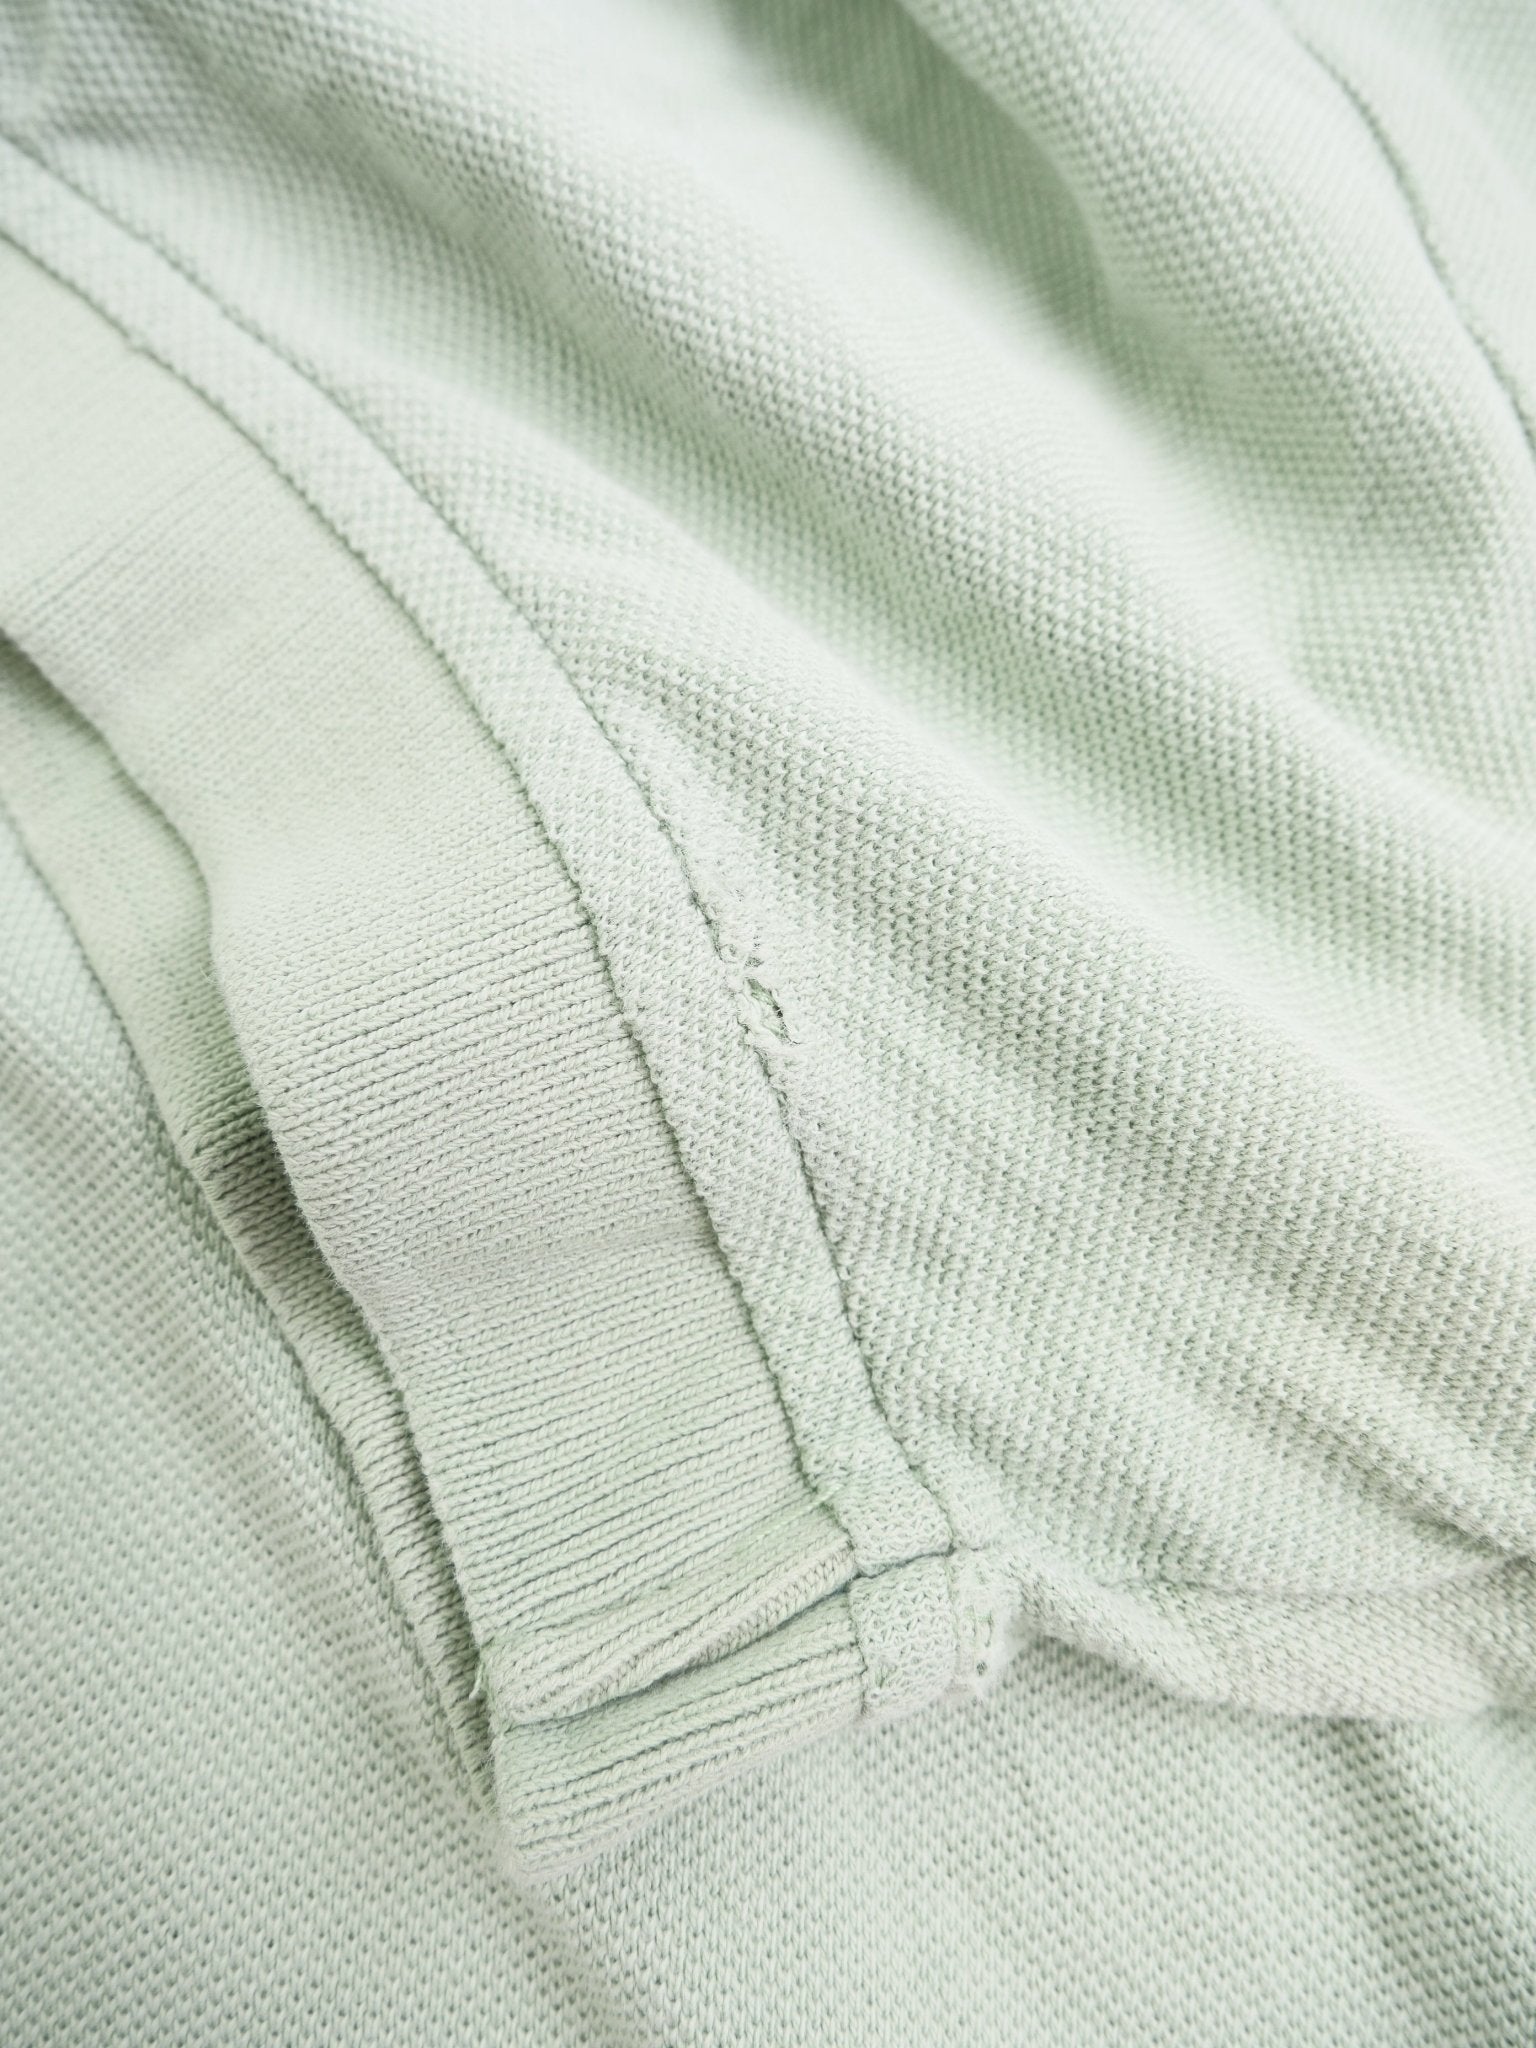 tommy embroidered Logo light green Polo Shirt - Peeces